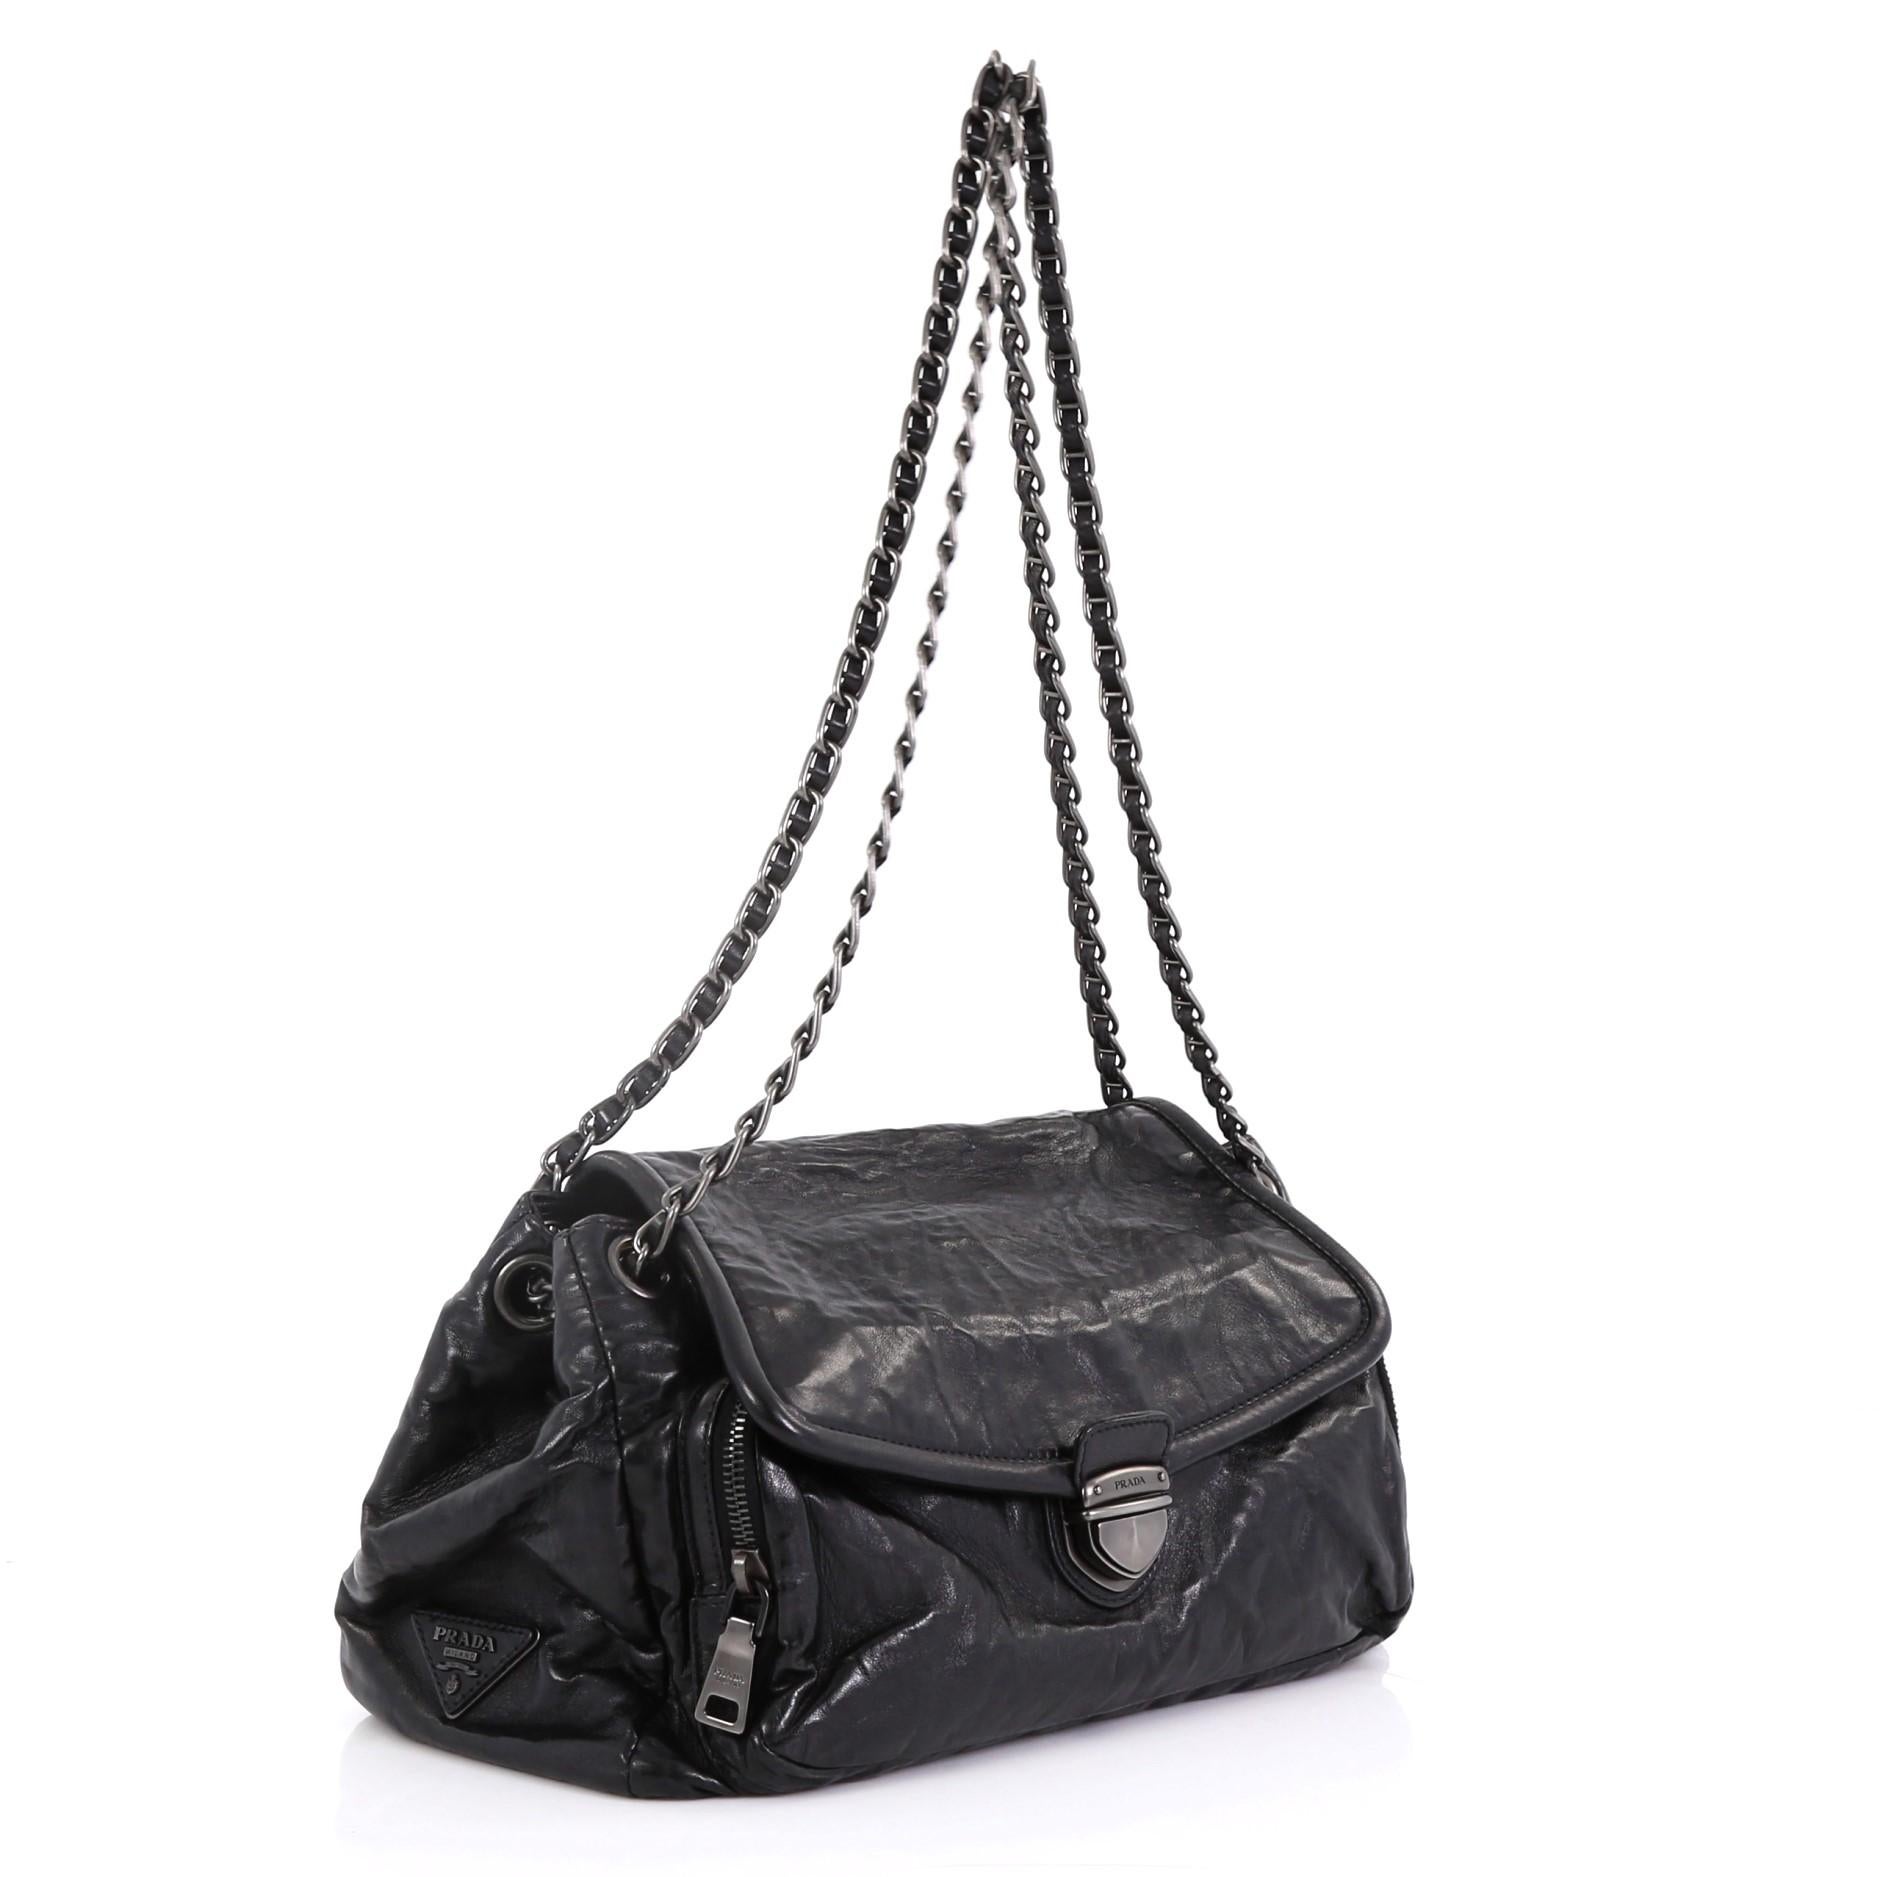 This Prada Pushlock Chain Flap Shoulder Bag Nappa Antique Medium, crafted in black nappa antique, features woven-in leather chain straps, exterior back slip pocket, zip pocket under its flap, and matte gunmetal-tone hardware. Its push-lock closure